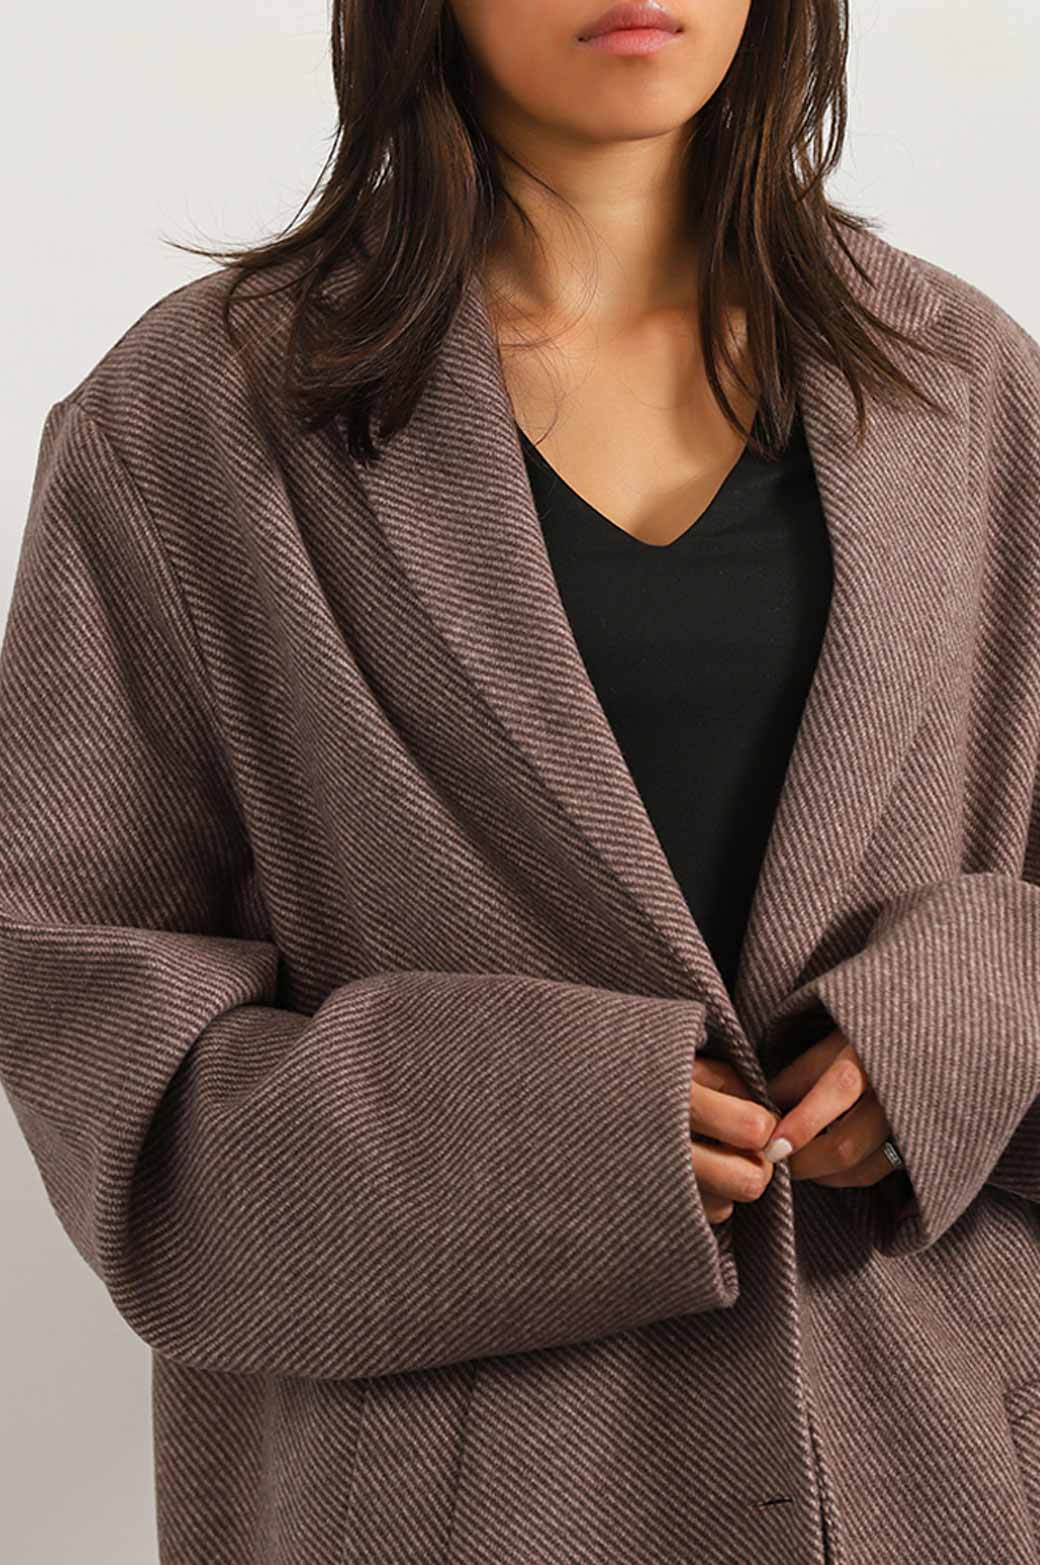 BROWN TEXTURED LONG COAT STRETCH